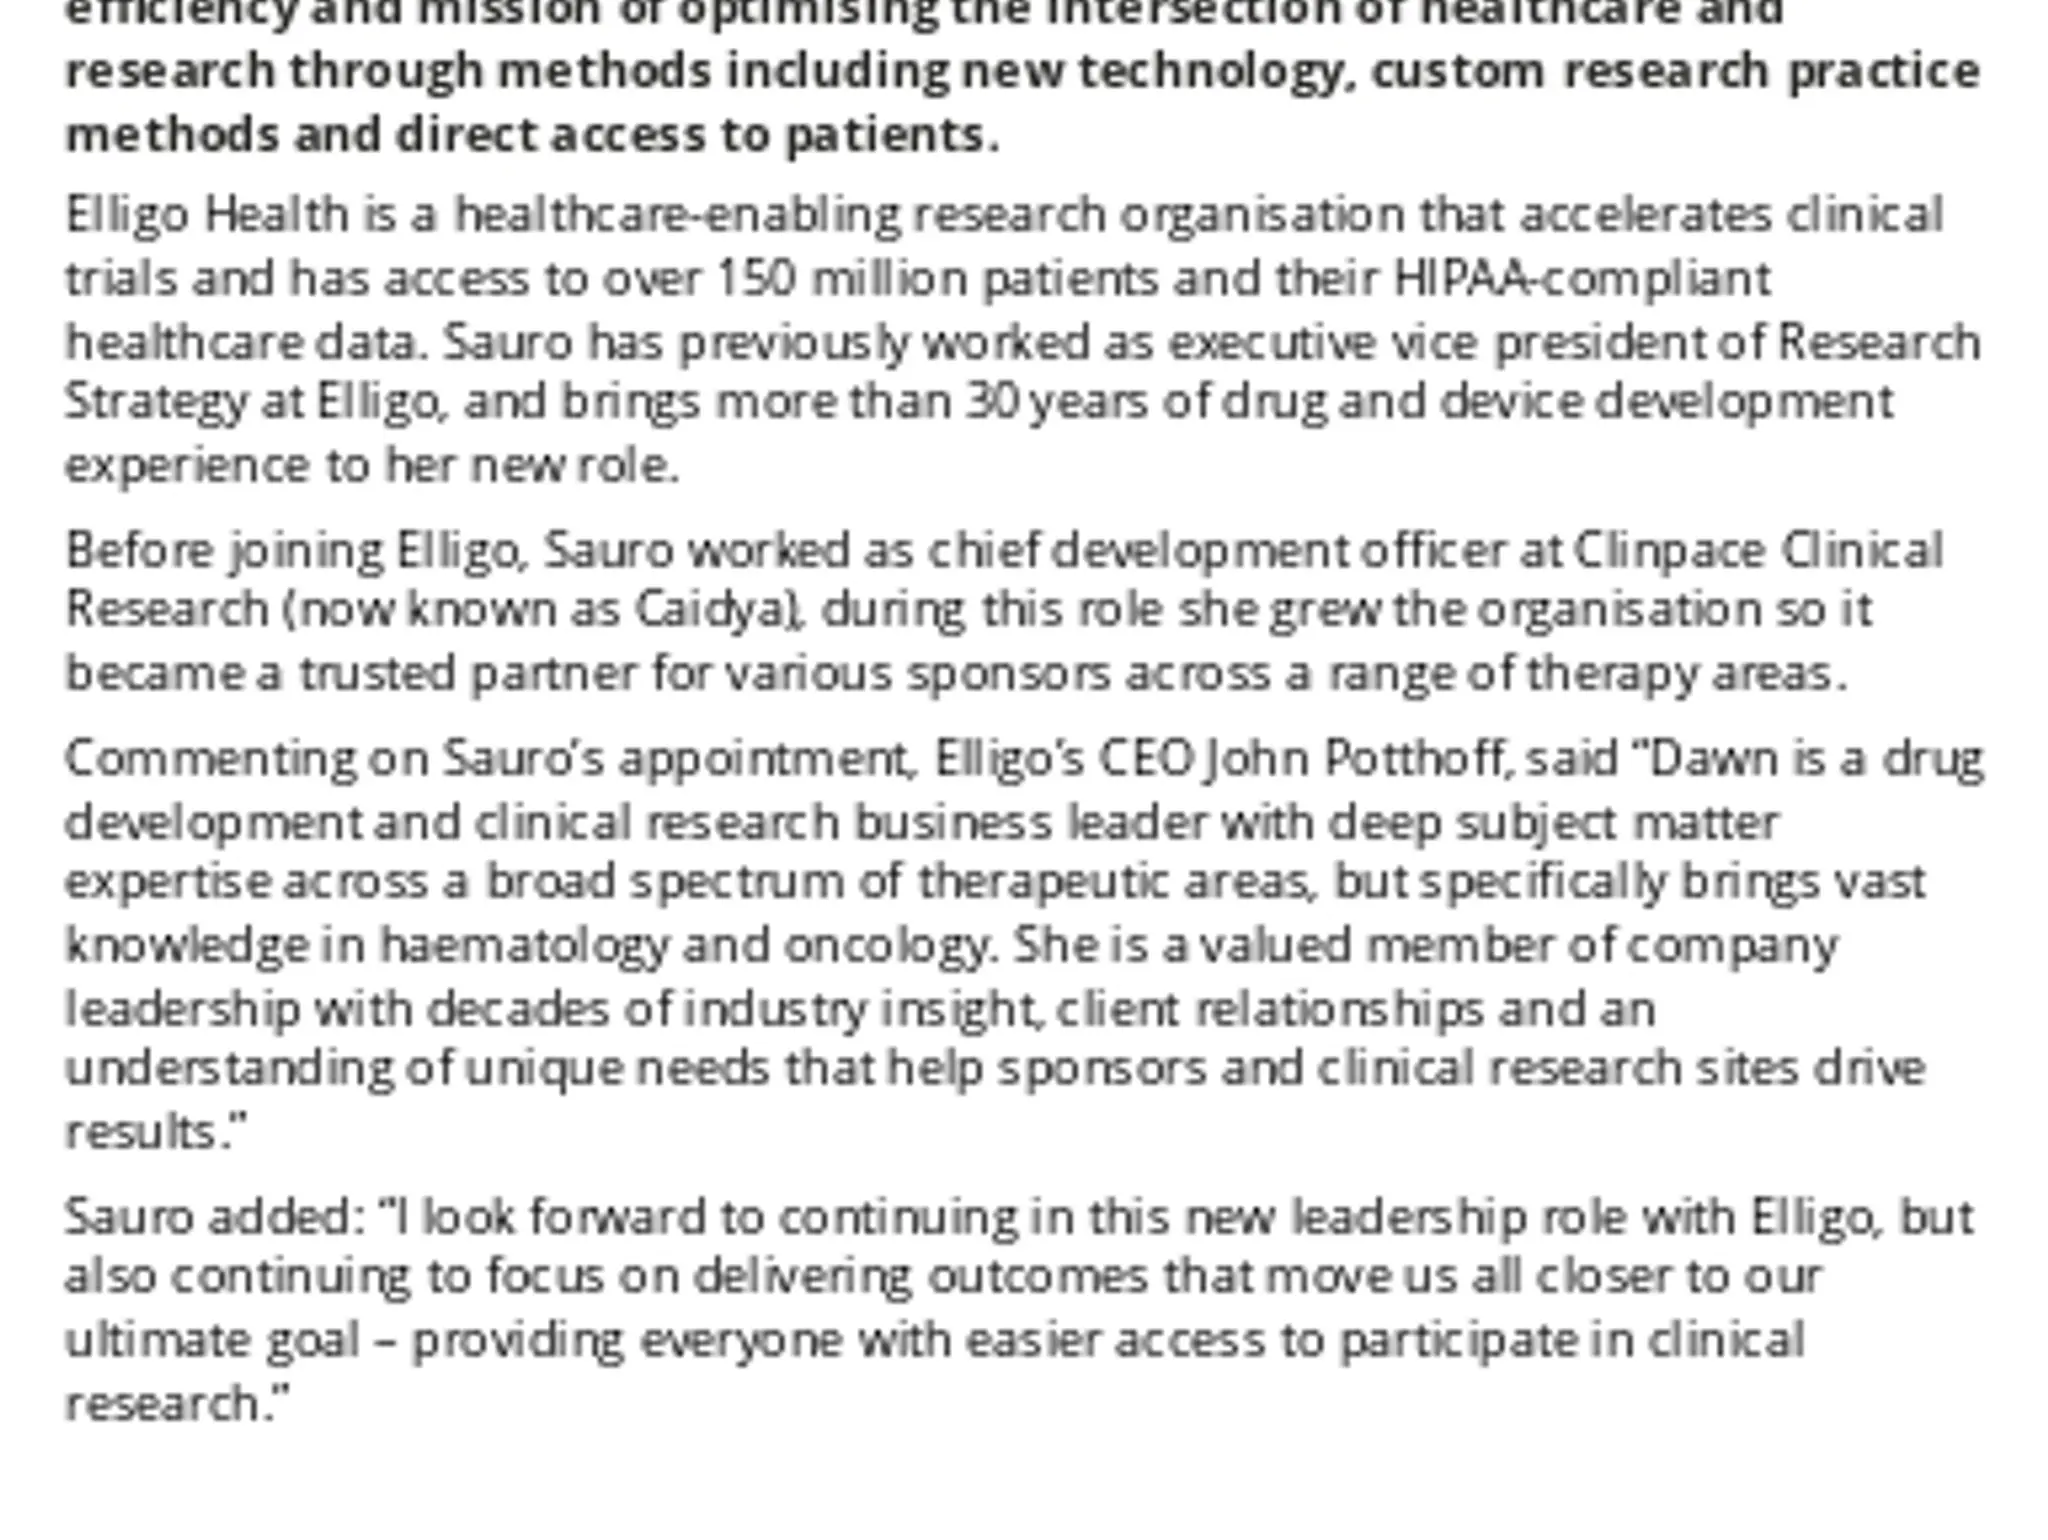 Dawn Sauro Appointed To Chief Operating Officer At Elligo Health